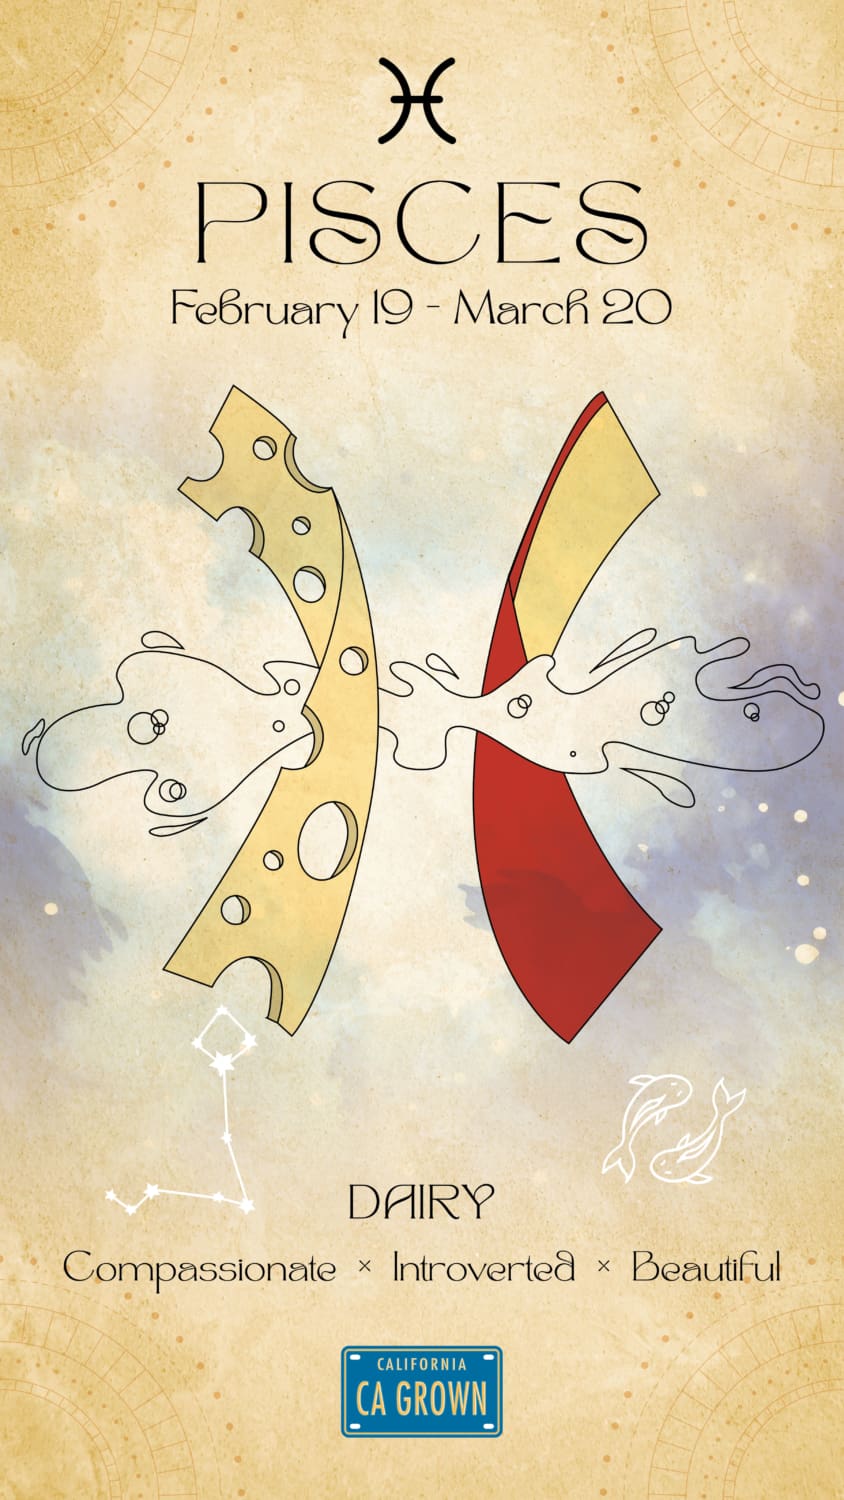 PIsces Crop Zodiac. Picture of two slices of cheese in the shape of the Pisces sign